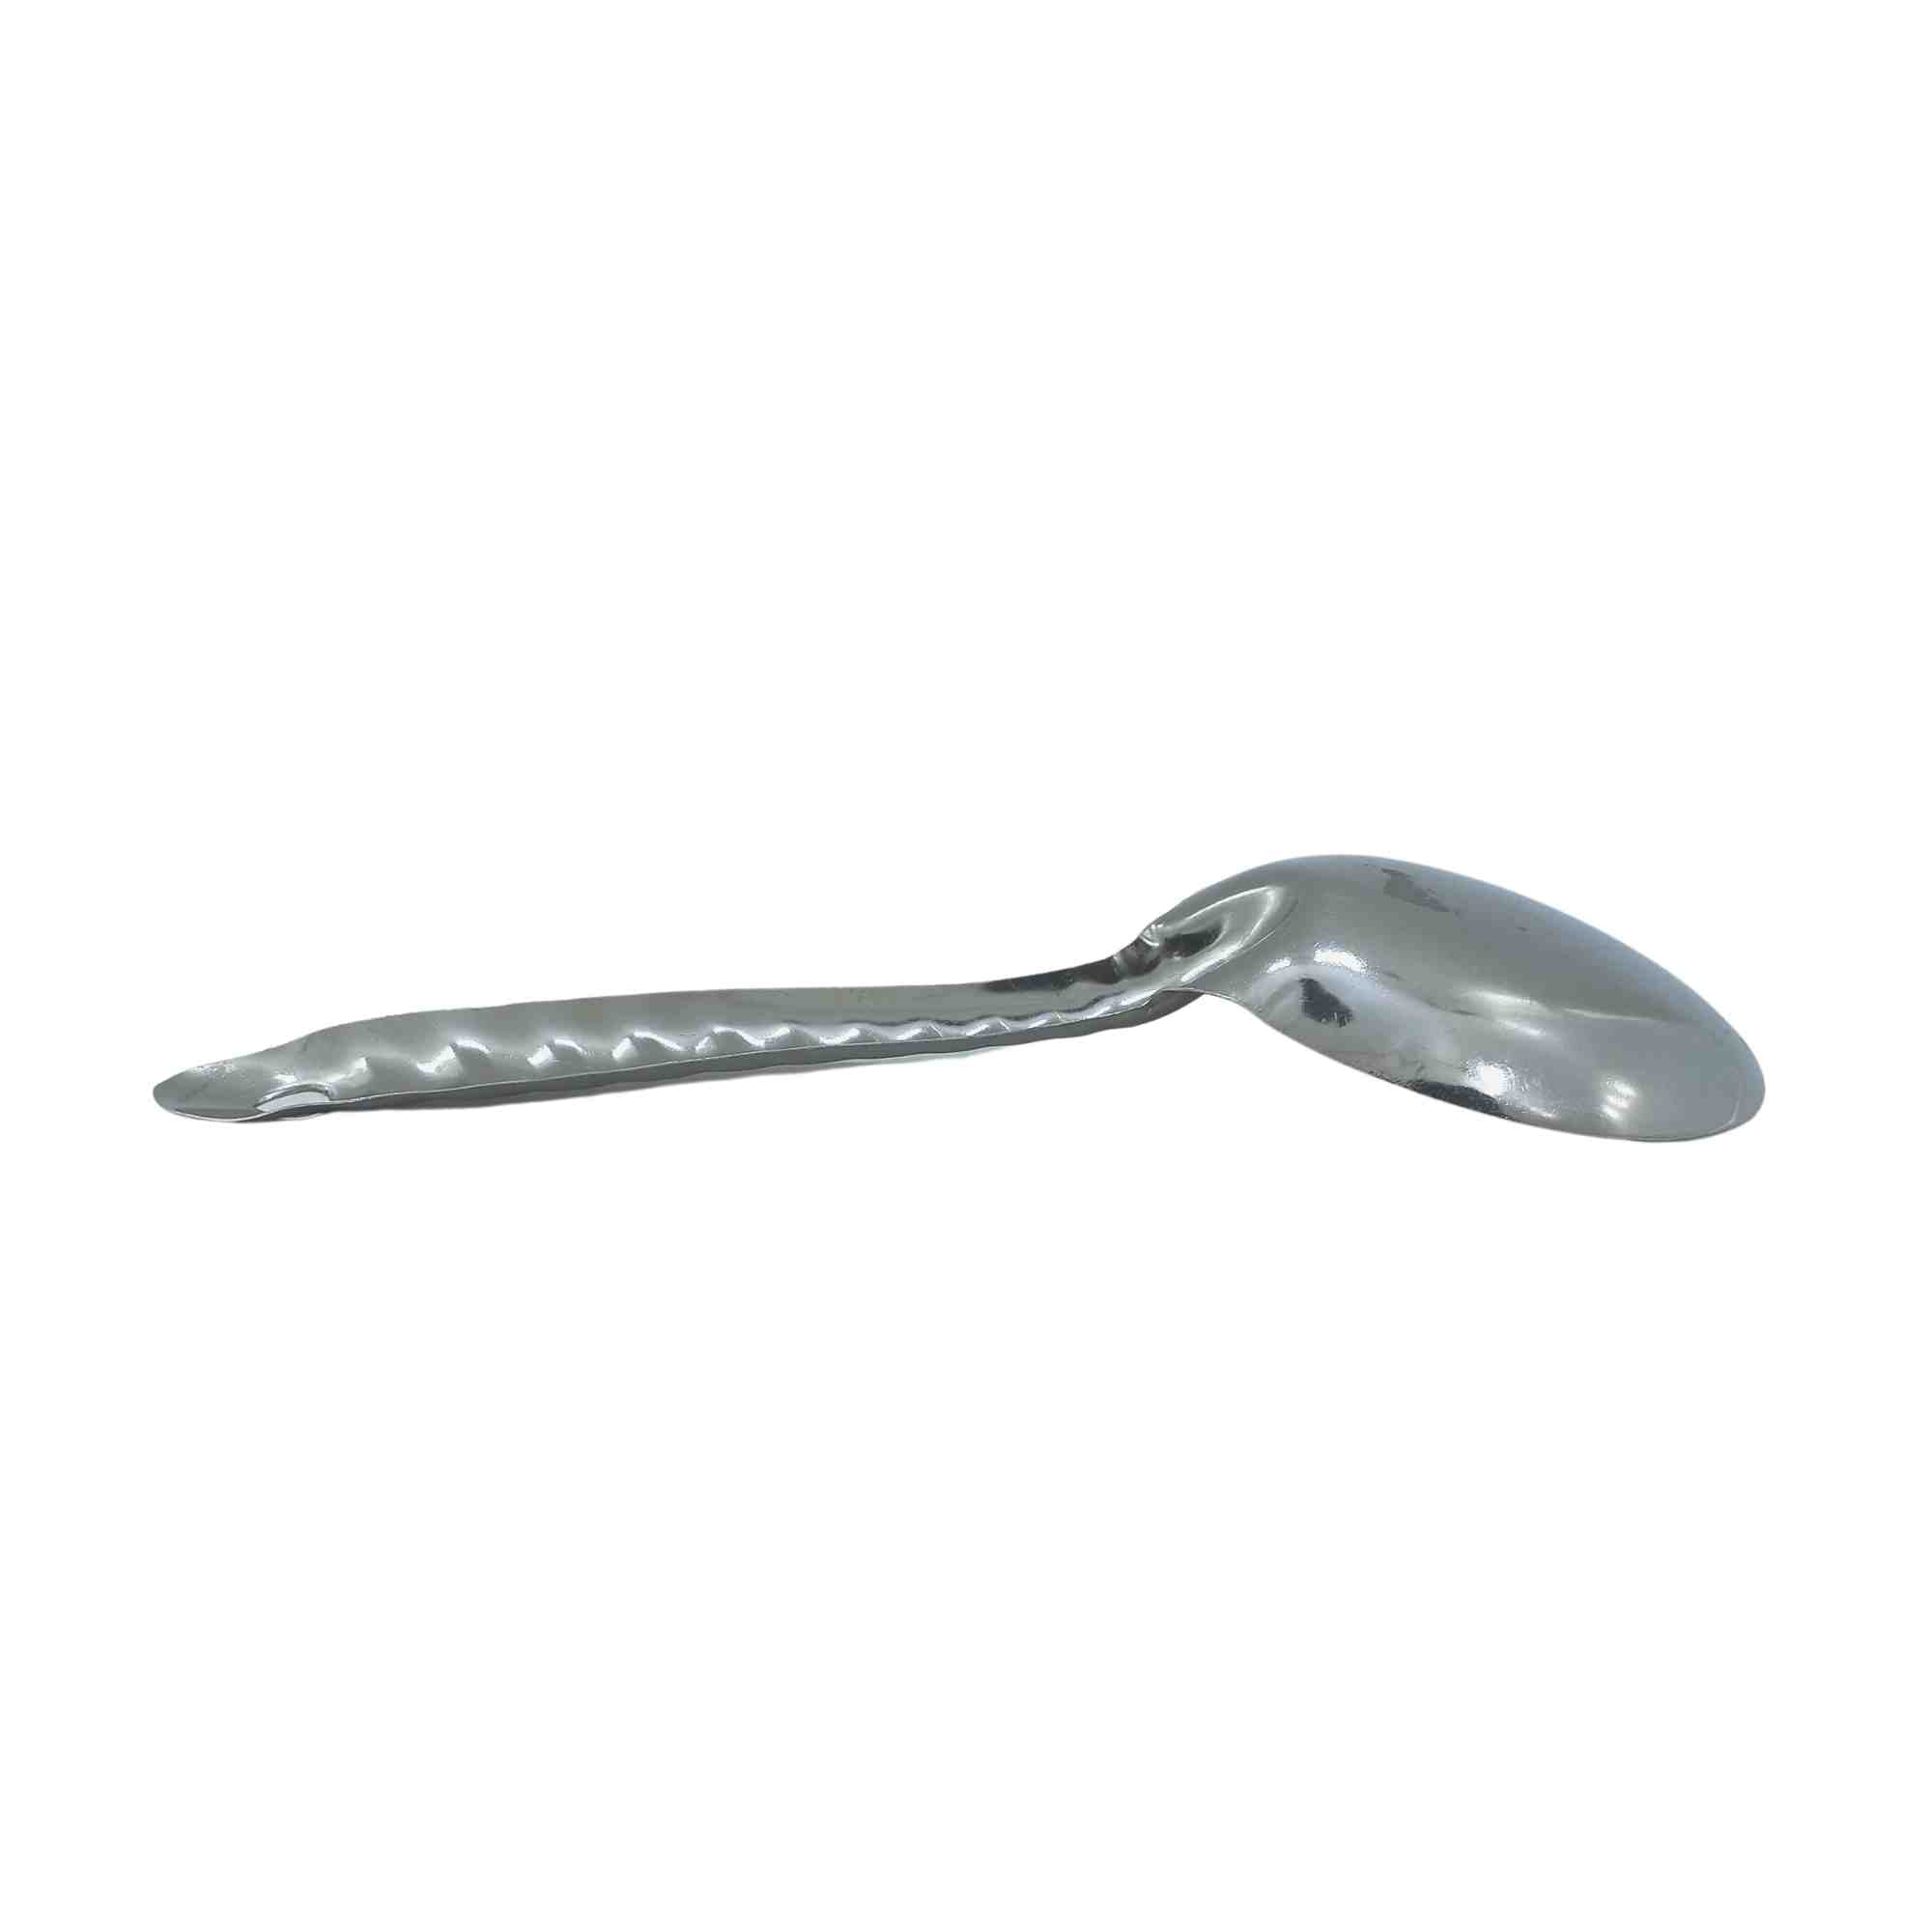 Rice-n-Curry-soup-serving-spoon-Stainless-steel-silver-color-large-spoon